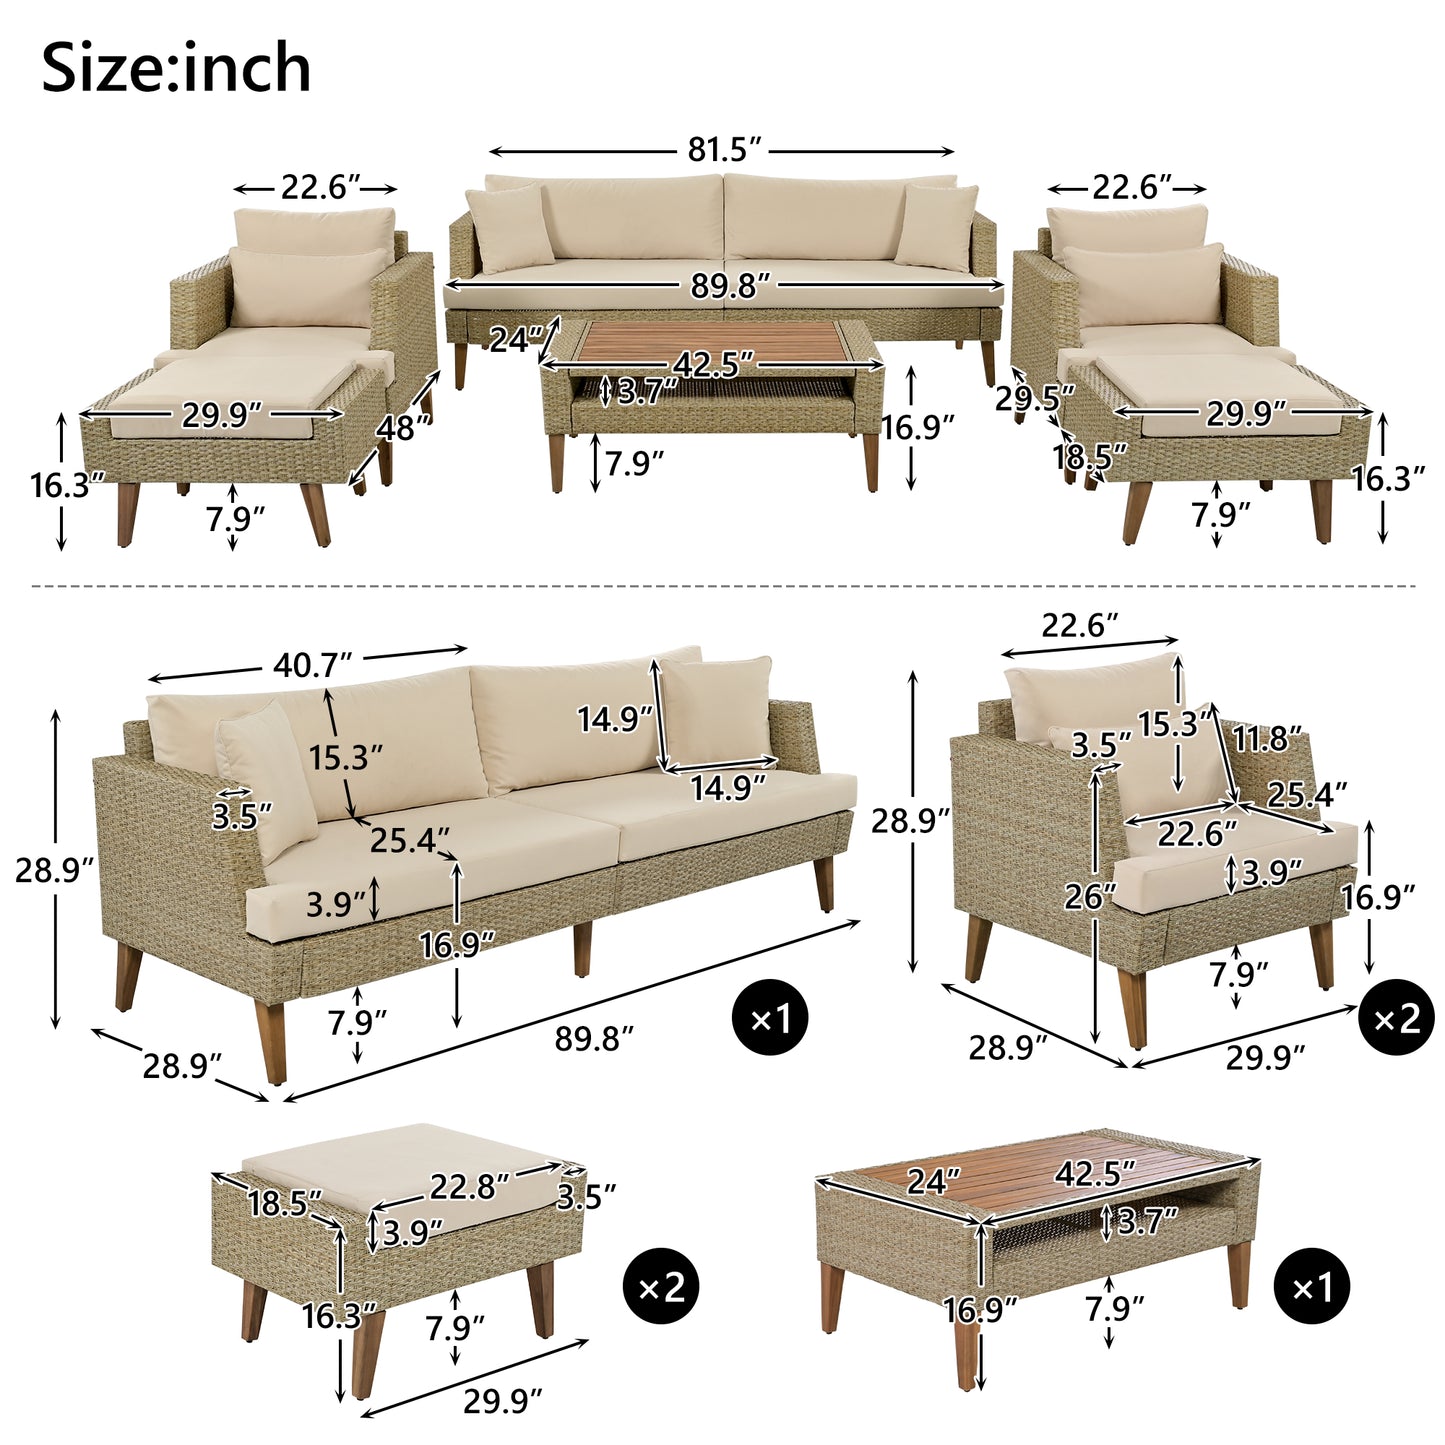 Syngar 6 Piece Patio Furniture Set, Outdoor Sectional Sofa Set with Ottomans, Coffee Table and Brown Cushions, All Weather Brown PE Wicker Conversation Chairs Set for Yard Balcony Poolside Deck